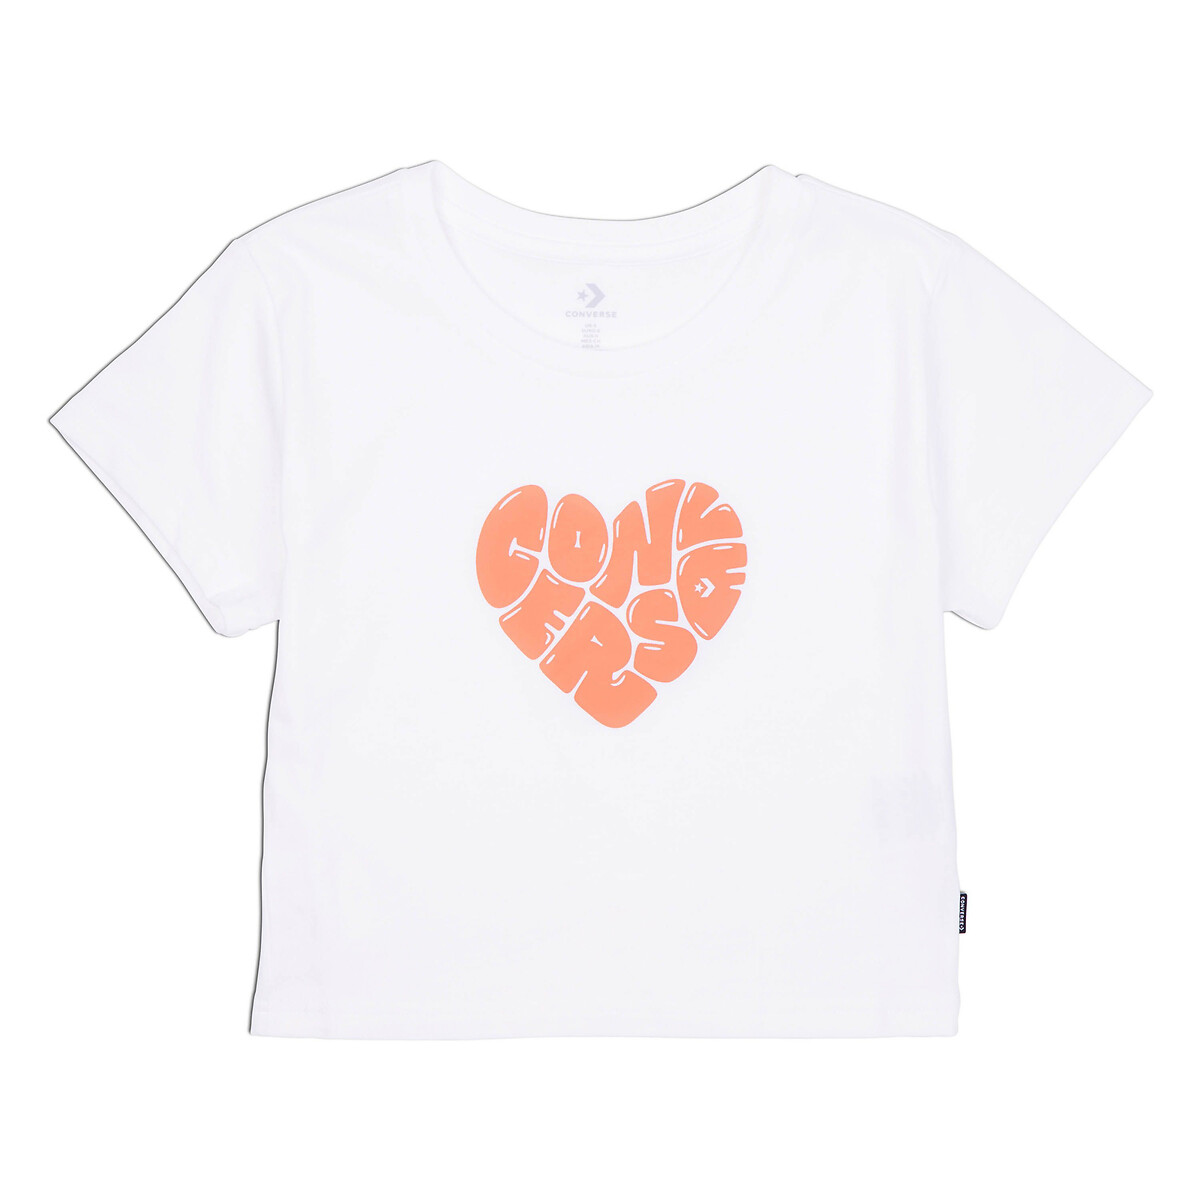 Converse T-Shirt Colorful Heart